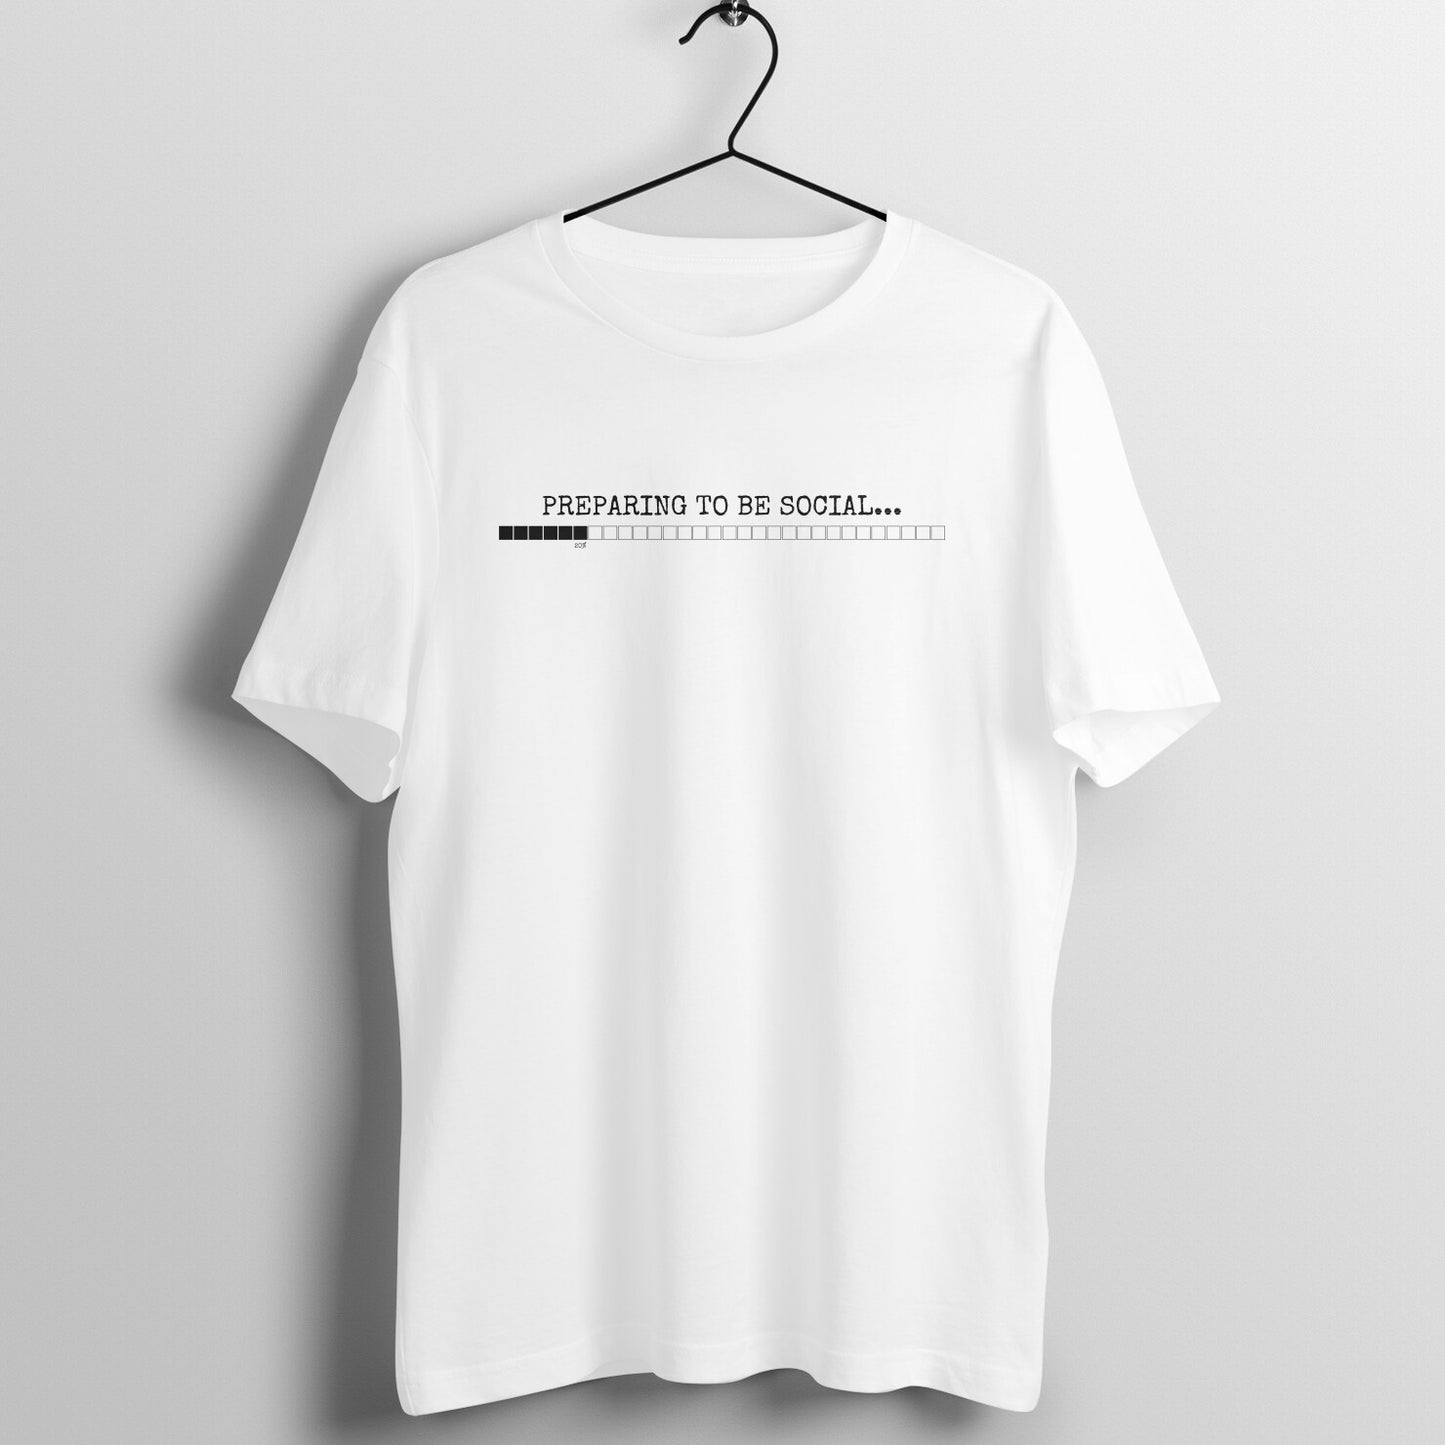 Preparing to be Social Tshirt for Introverts